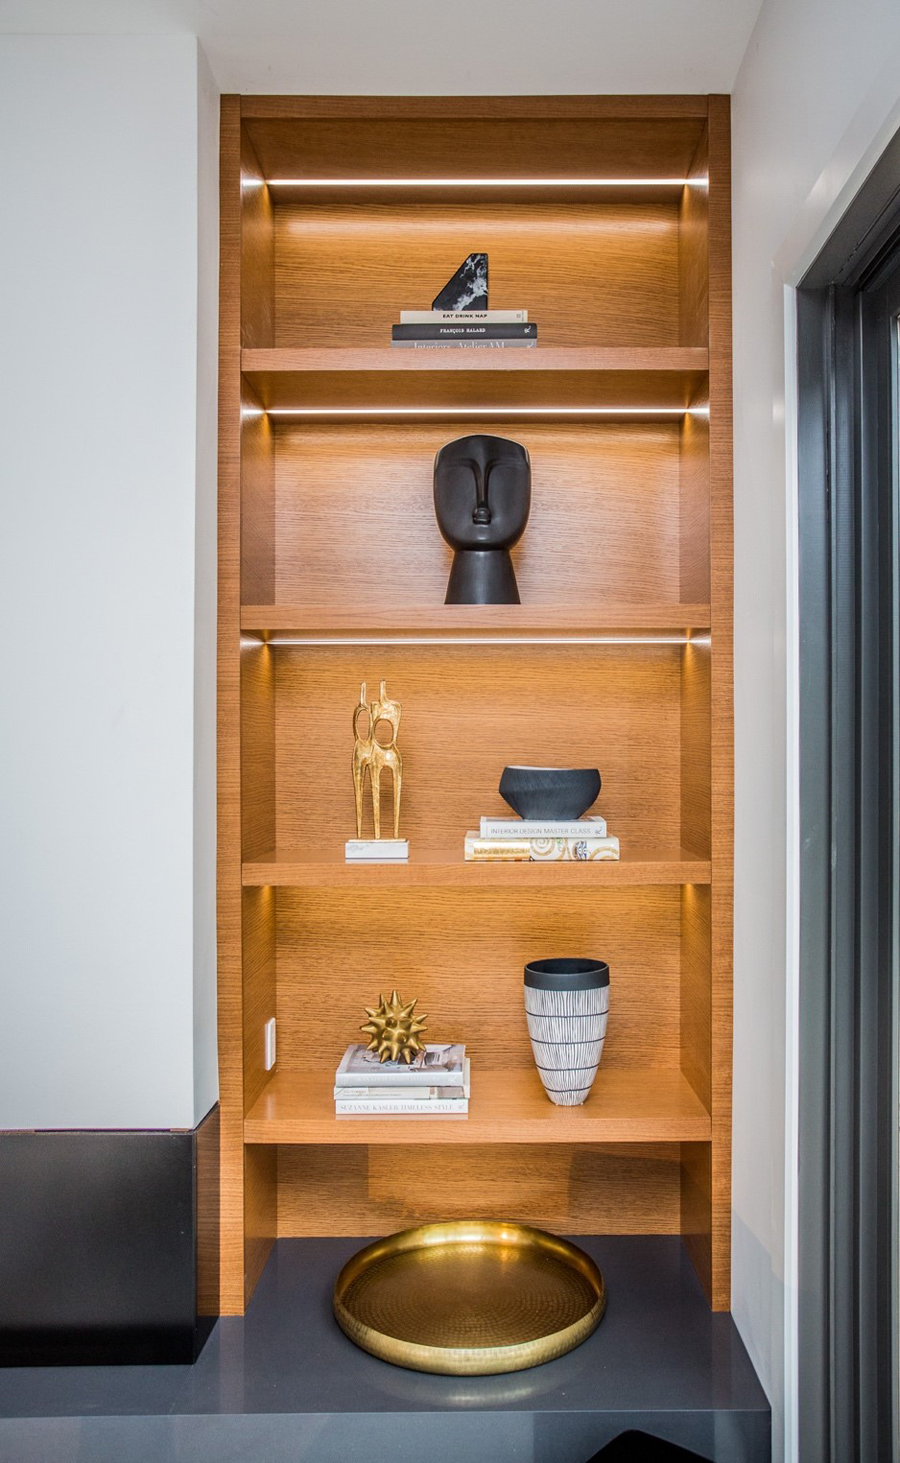 A vertical shelf with minimal items